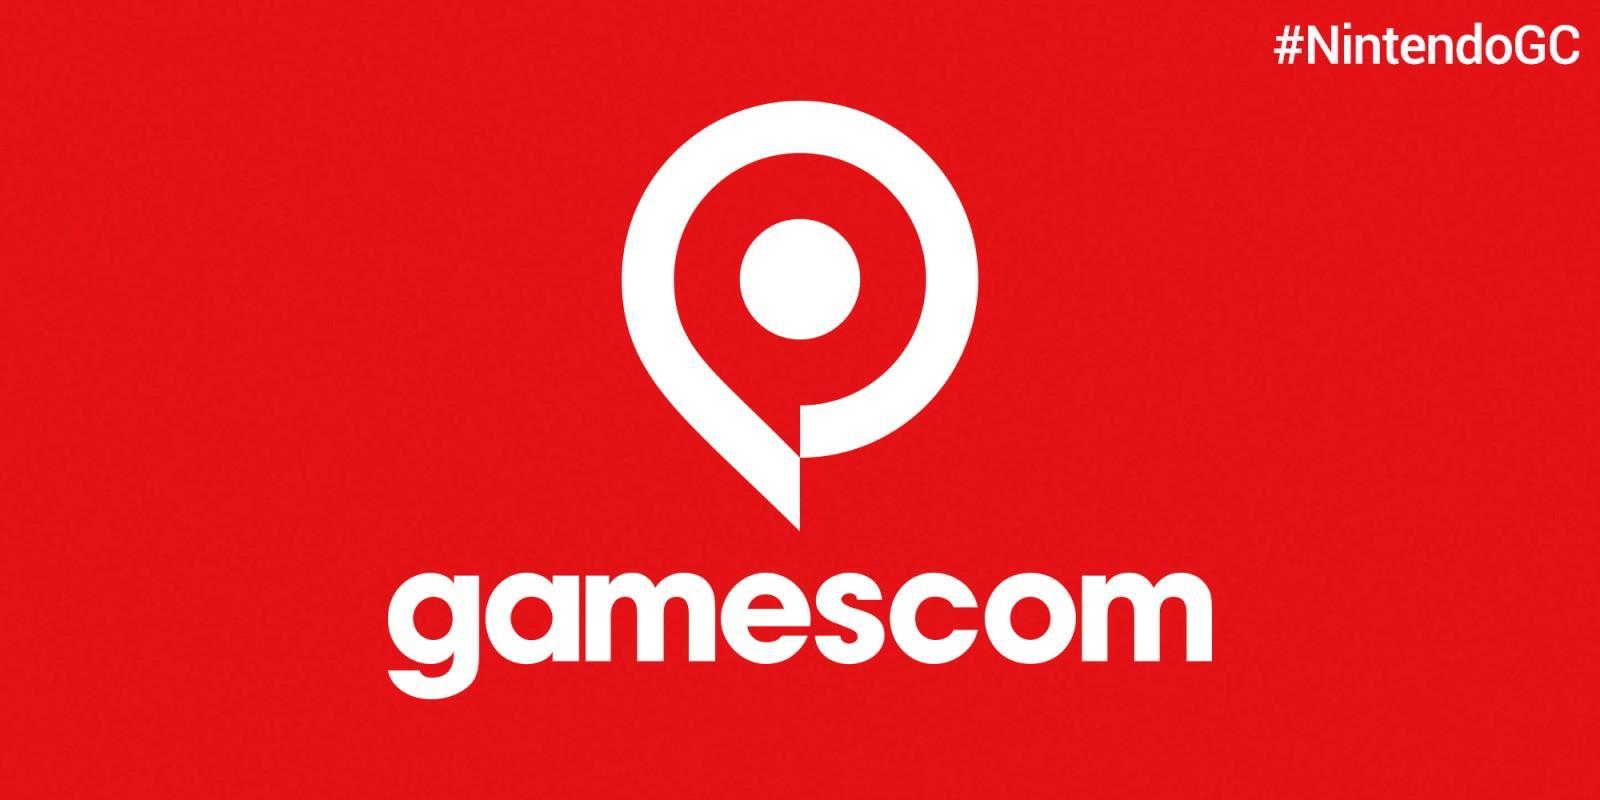 This year, 10% more companies registered for Gamescom